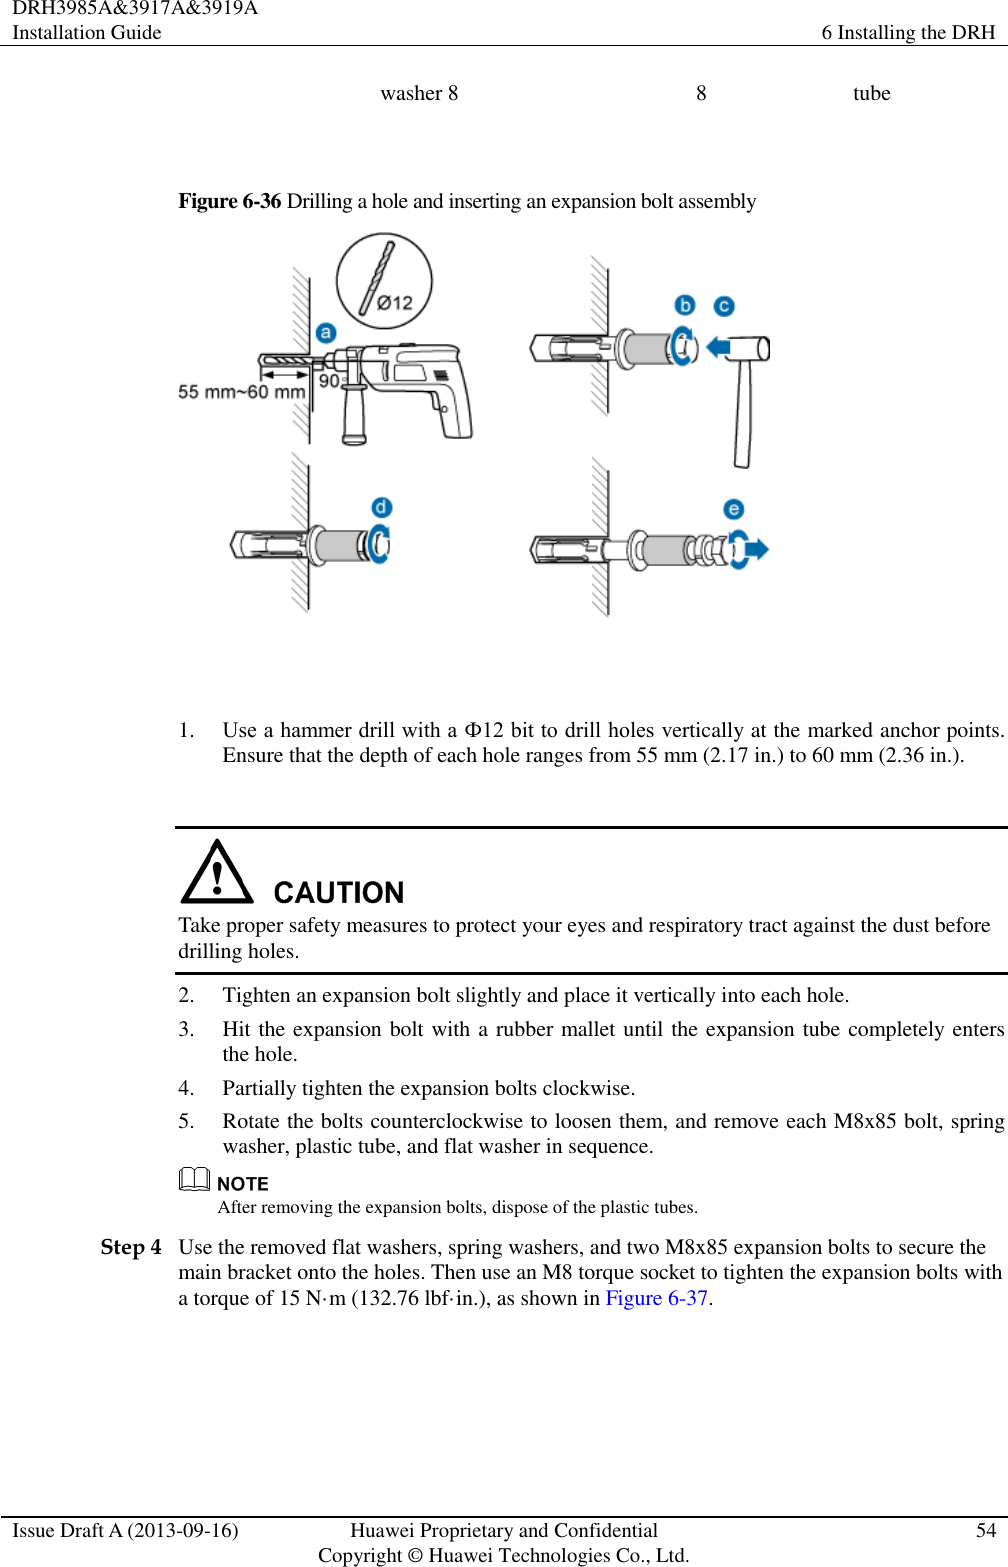 DRH3985A&amp;3917A&amp;3919A Installation Guide 6 Installing the DRH  Issue Draft A (2013-09-16) Huawei Proprietary and Confidential                                     Copyright © Huawei Technologies Co., Ltd. 54  washer 8 8 tube  Figure 6-36 Drilling a hole and inserting an expansion bolt assembly   1. Use a hammer drill with a Ф12 bit to drill holes vertically at the marked anchor points. Ensure that the depth of each hole ranges from 55 mm (2.17 in.) to 60 mm (2.36 in.).   Take proper safety measures to protect your eyes and respiratory tract against the dust before drilling holes. 2. Tighten an expansion bolt slightly and place it vertically into each hole. 3. Hit the expansion bolt with a rubber mallet until the expansion tube completely enters the hole. 4. Partially tighten the expansion bolts clockwise. 5. Rotate the bolts counterclockwise to loosen them, and remove each M8x85 bolt, spring washer, plastic tube, and flat washer in sequence.  After removing the expansion bolts, dispose of the plastic tubes. Step 4 Use the removed flat washers, spring washers, and two M8x85 expansion bolts to secure the main bracket onto the holes. Then use an M8 torque socket to tighten the expansion bolts with a torque of 15 N·m (132.76 lbf·in.), as shown in Figure 6-37.  